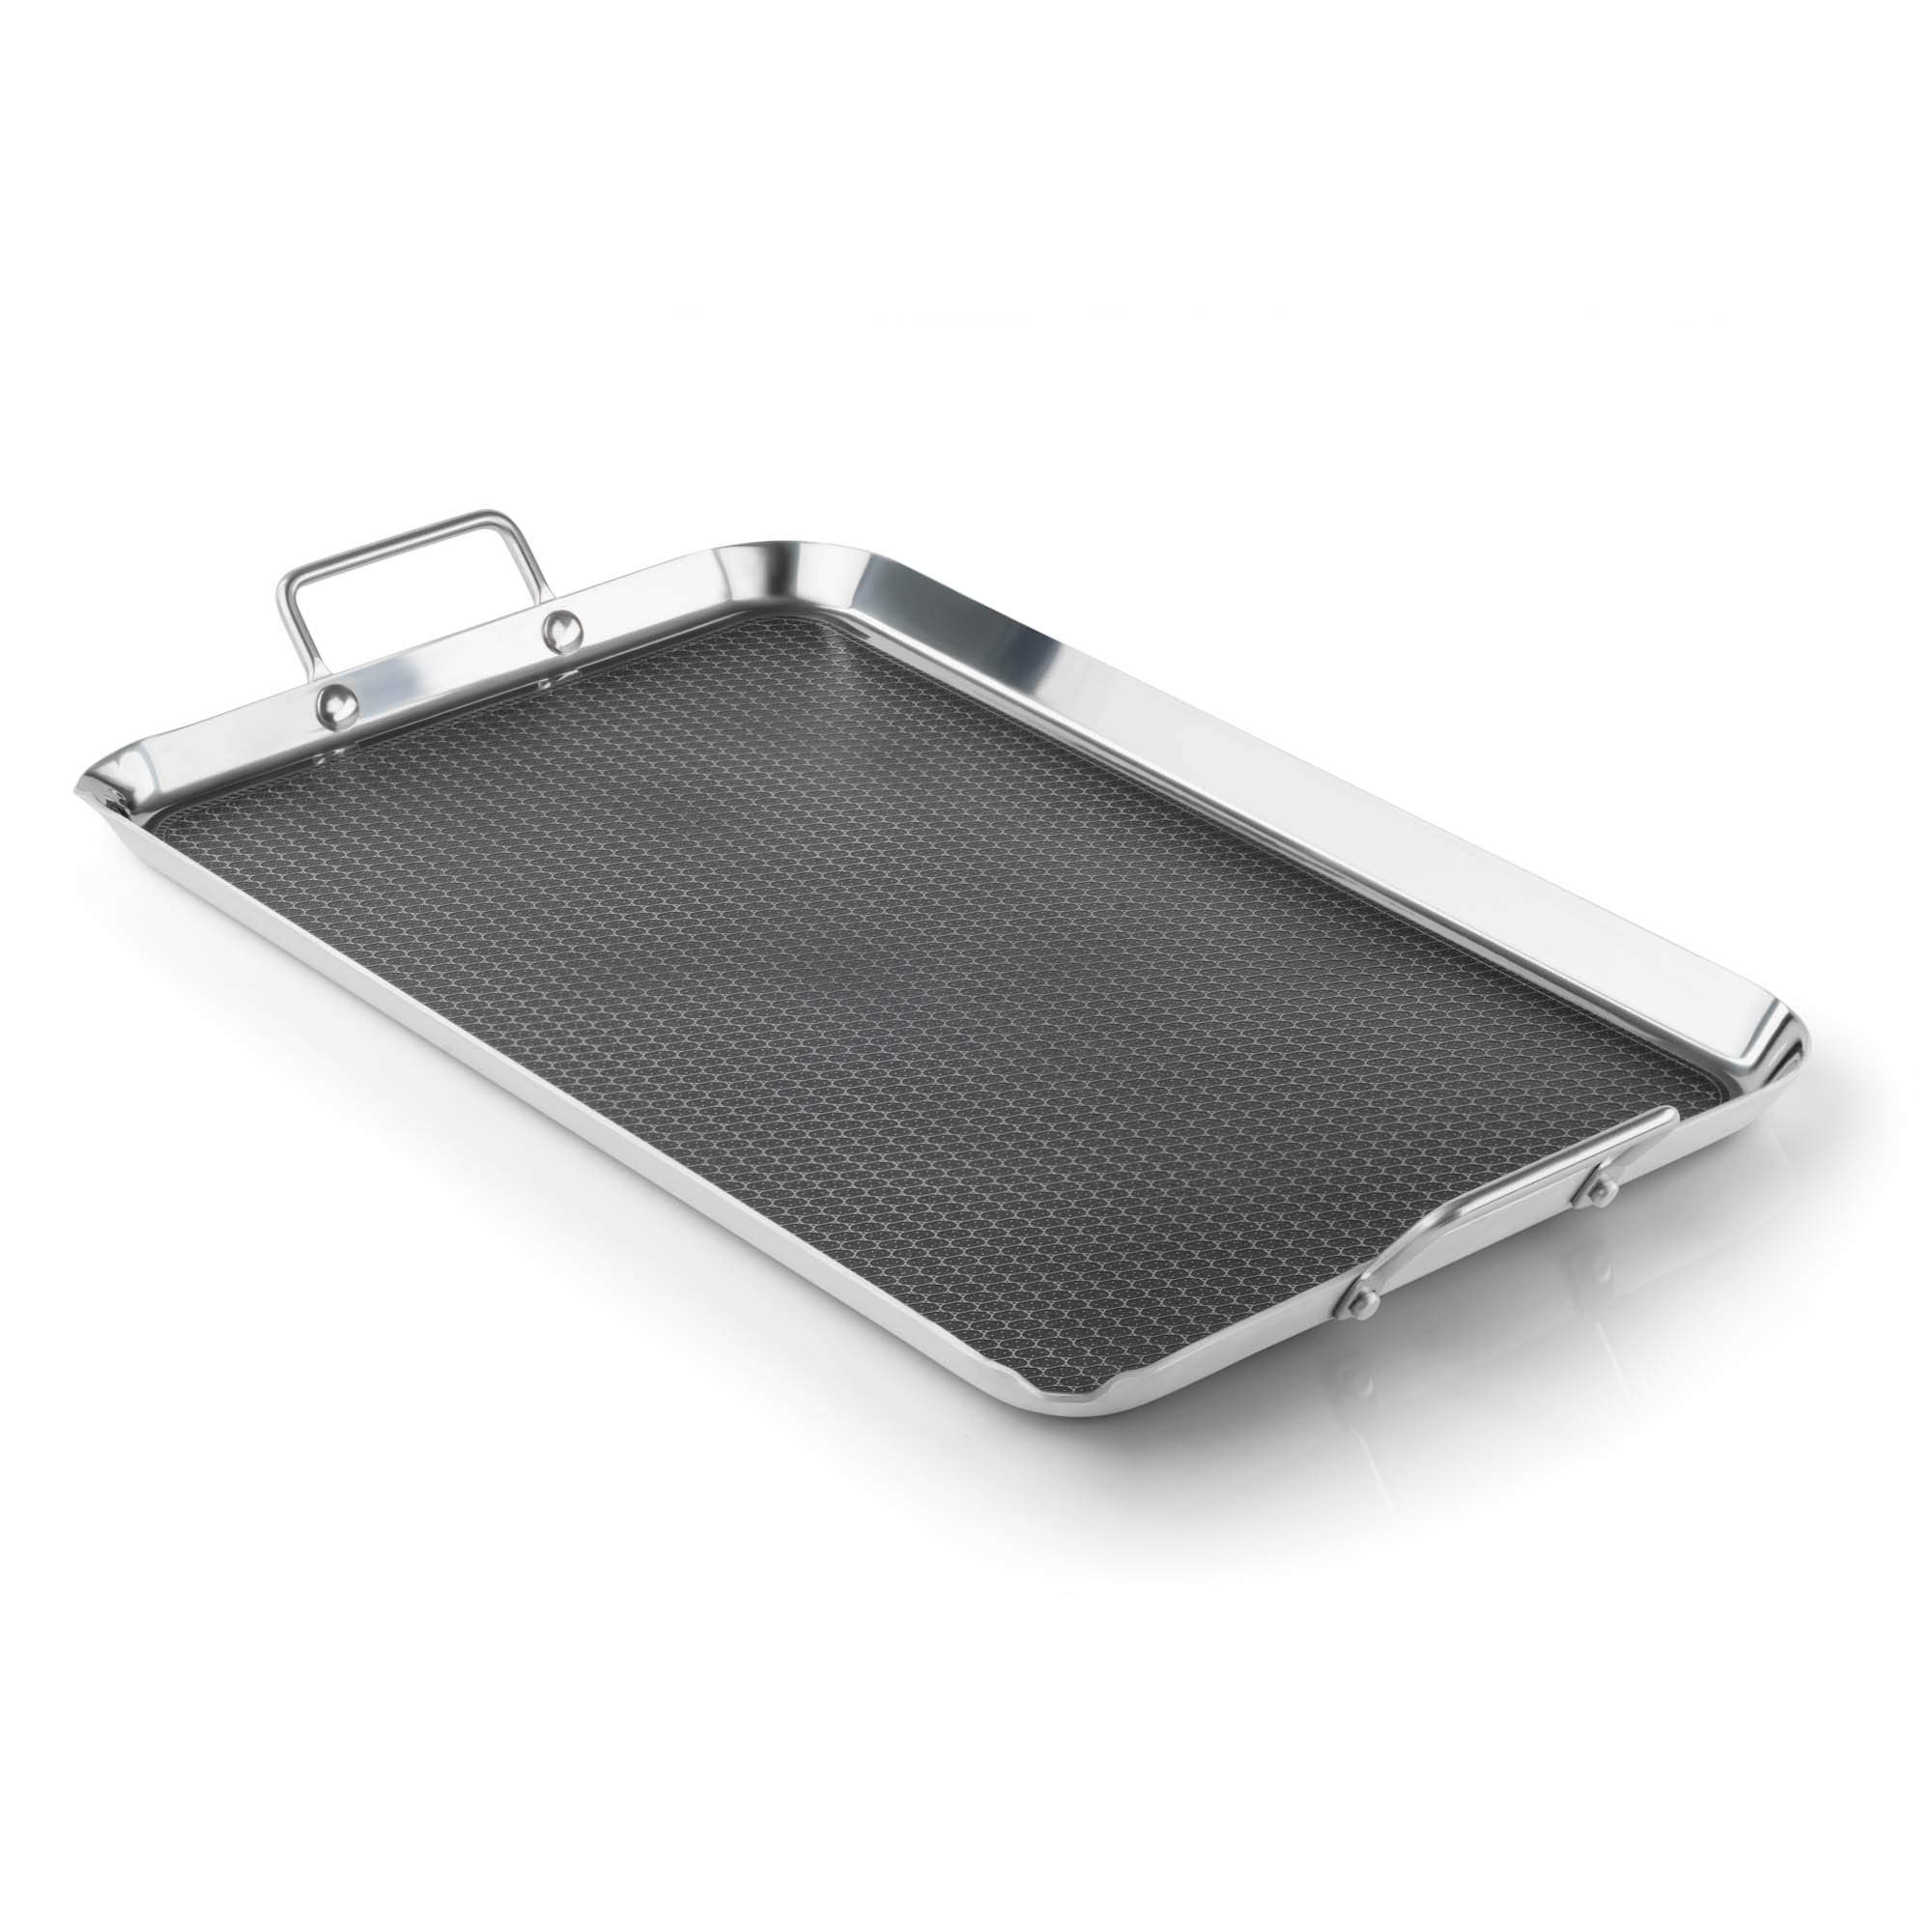 GSI Outdoors - Gourmet Griddle 15.2 x 9.5 inch Griddle